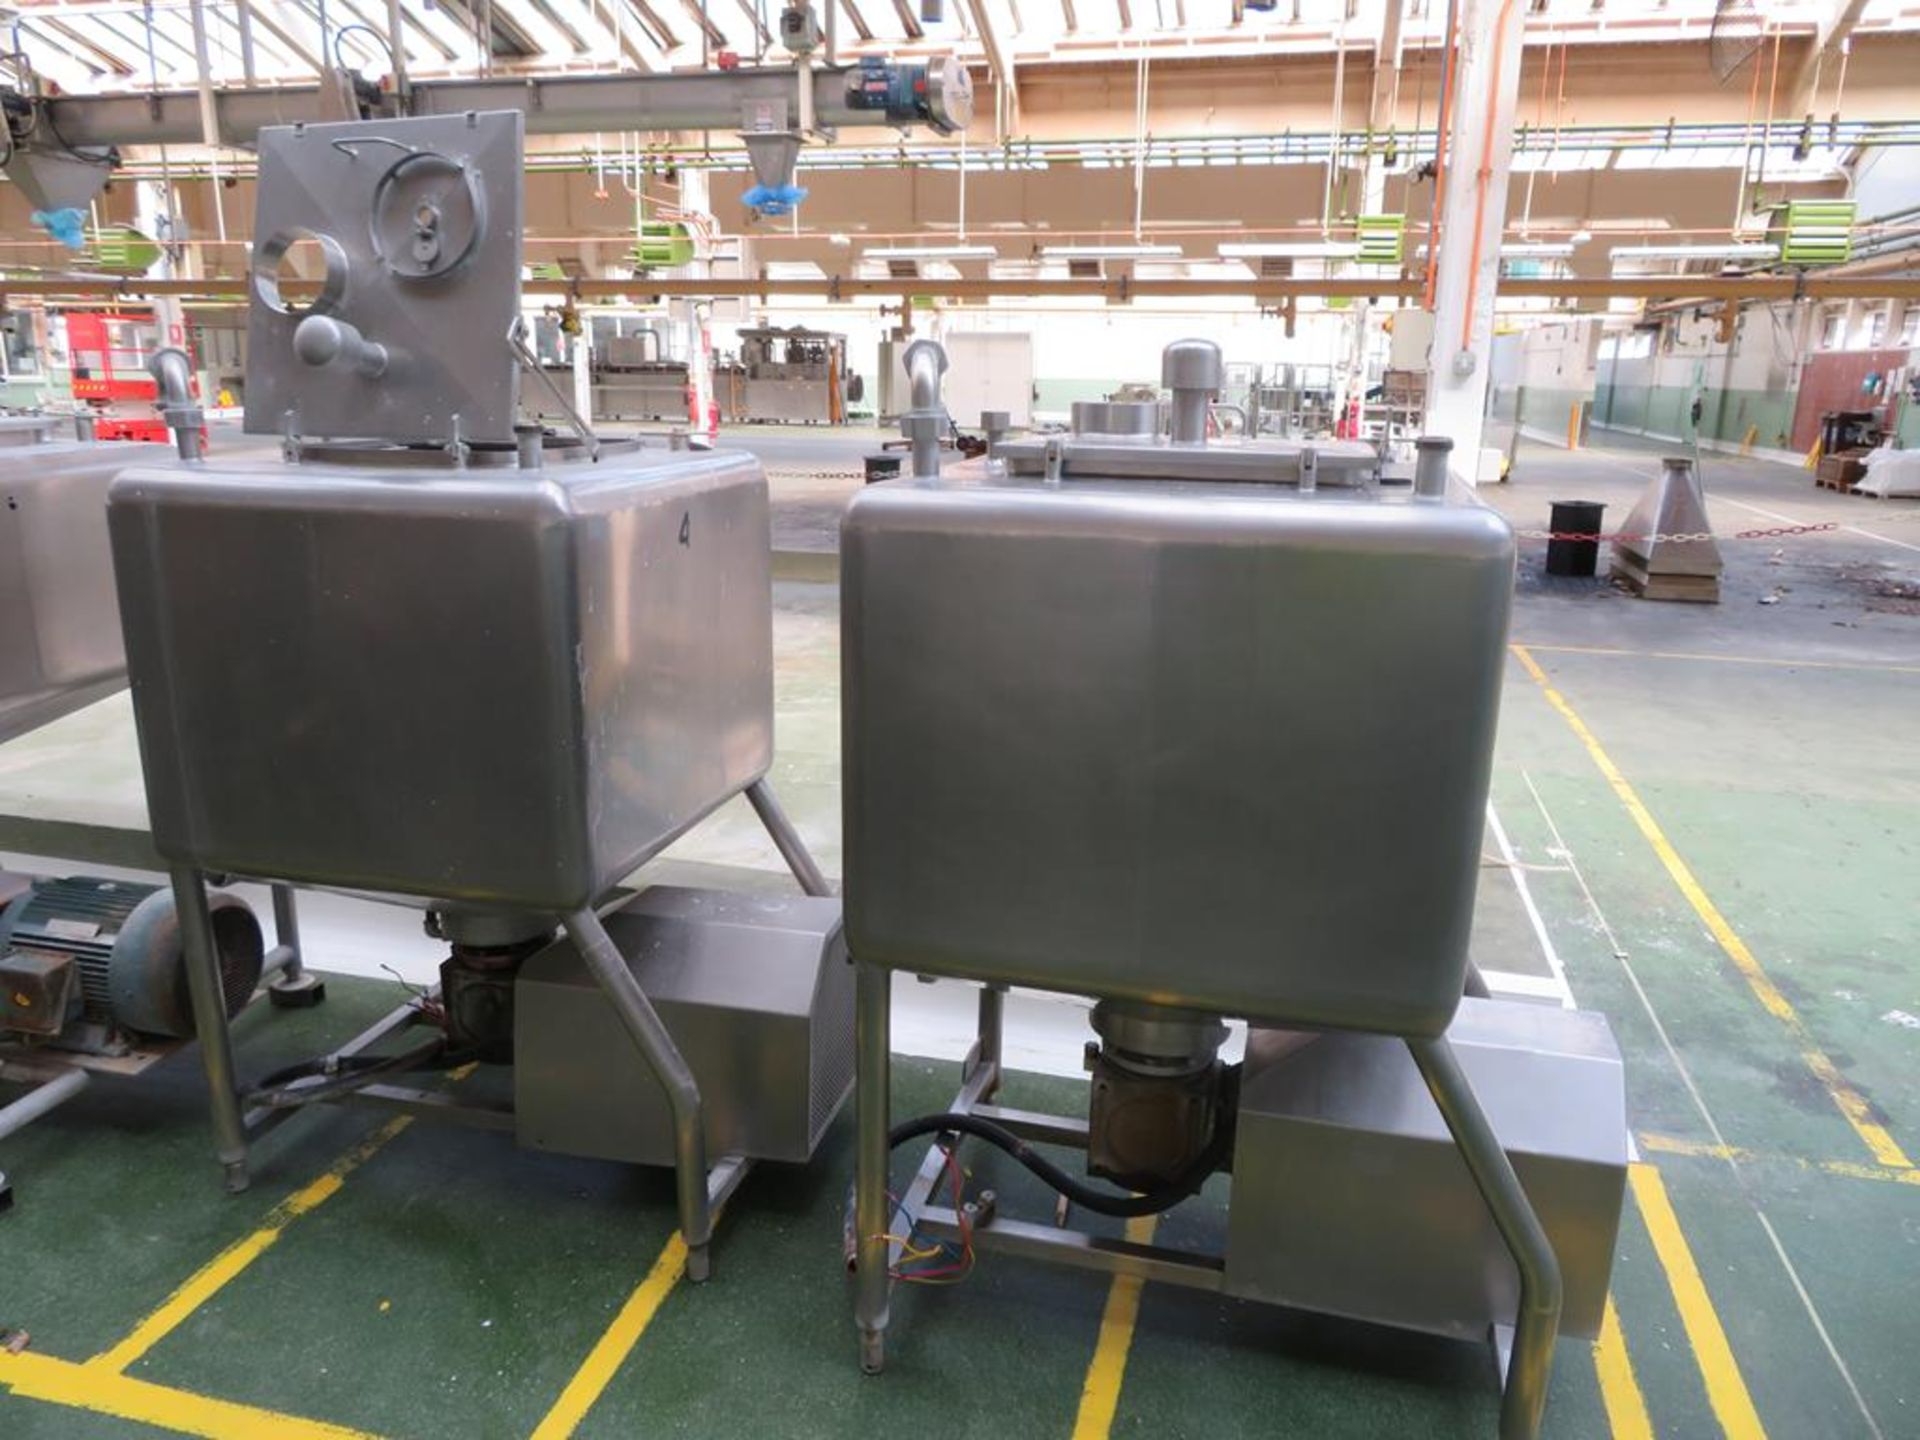 2 x Fat Mixing Tanks with Motor Driven Bottom Blade (900 x 900 x 900 mm deep) - Image 6 of 6